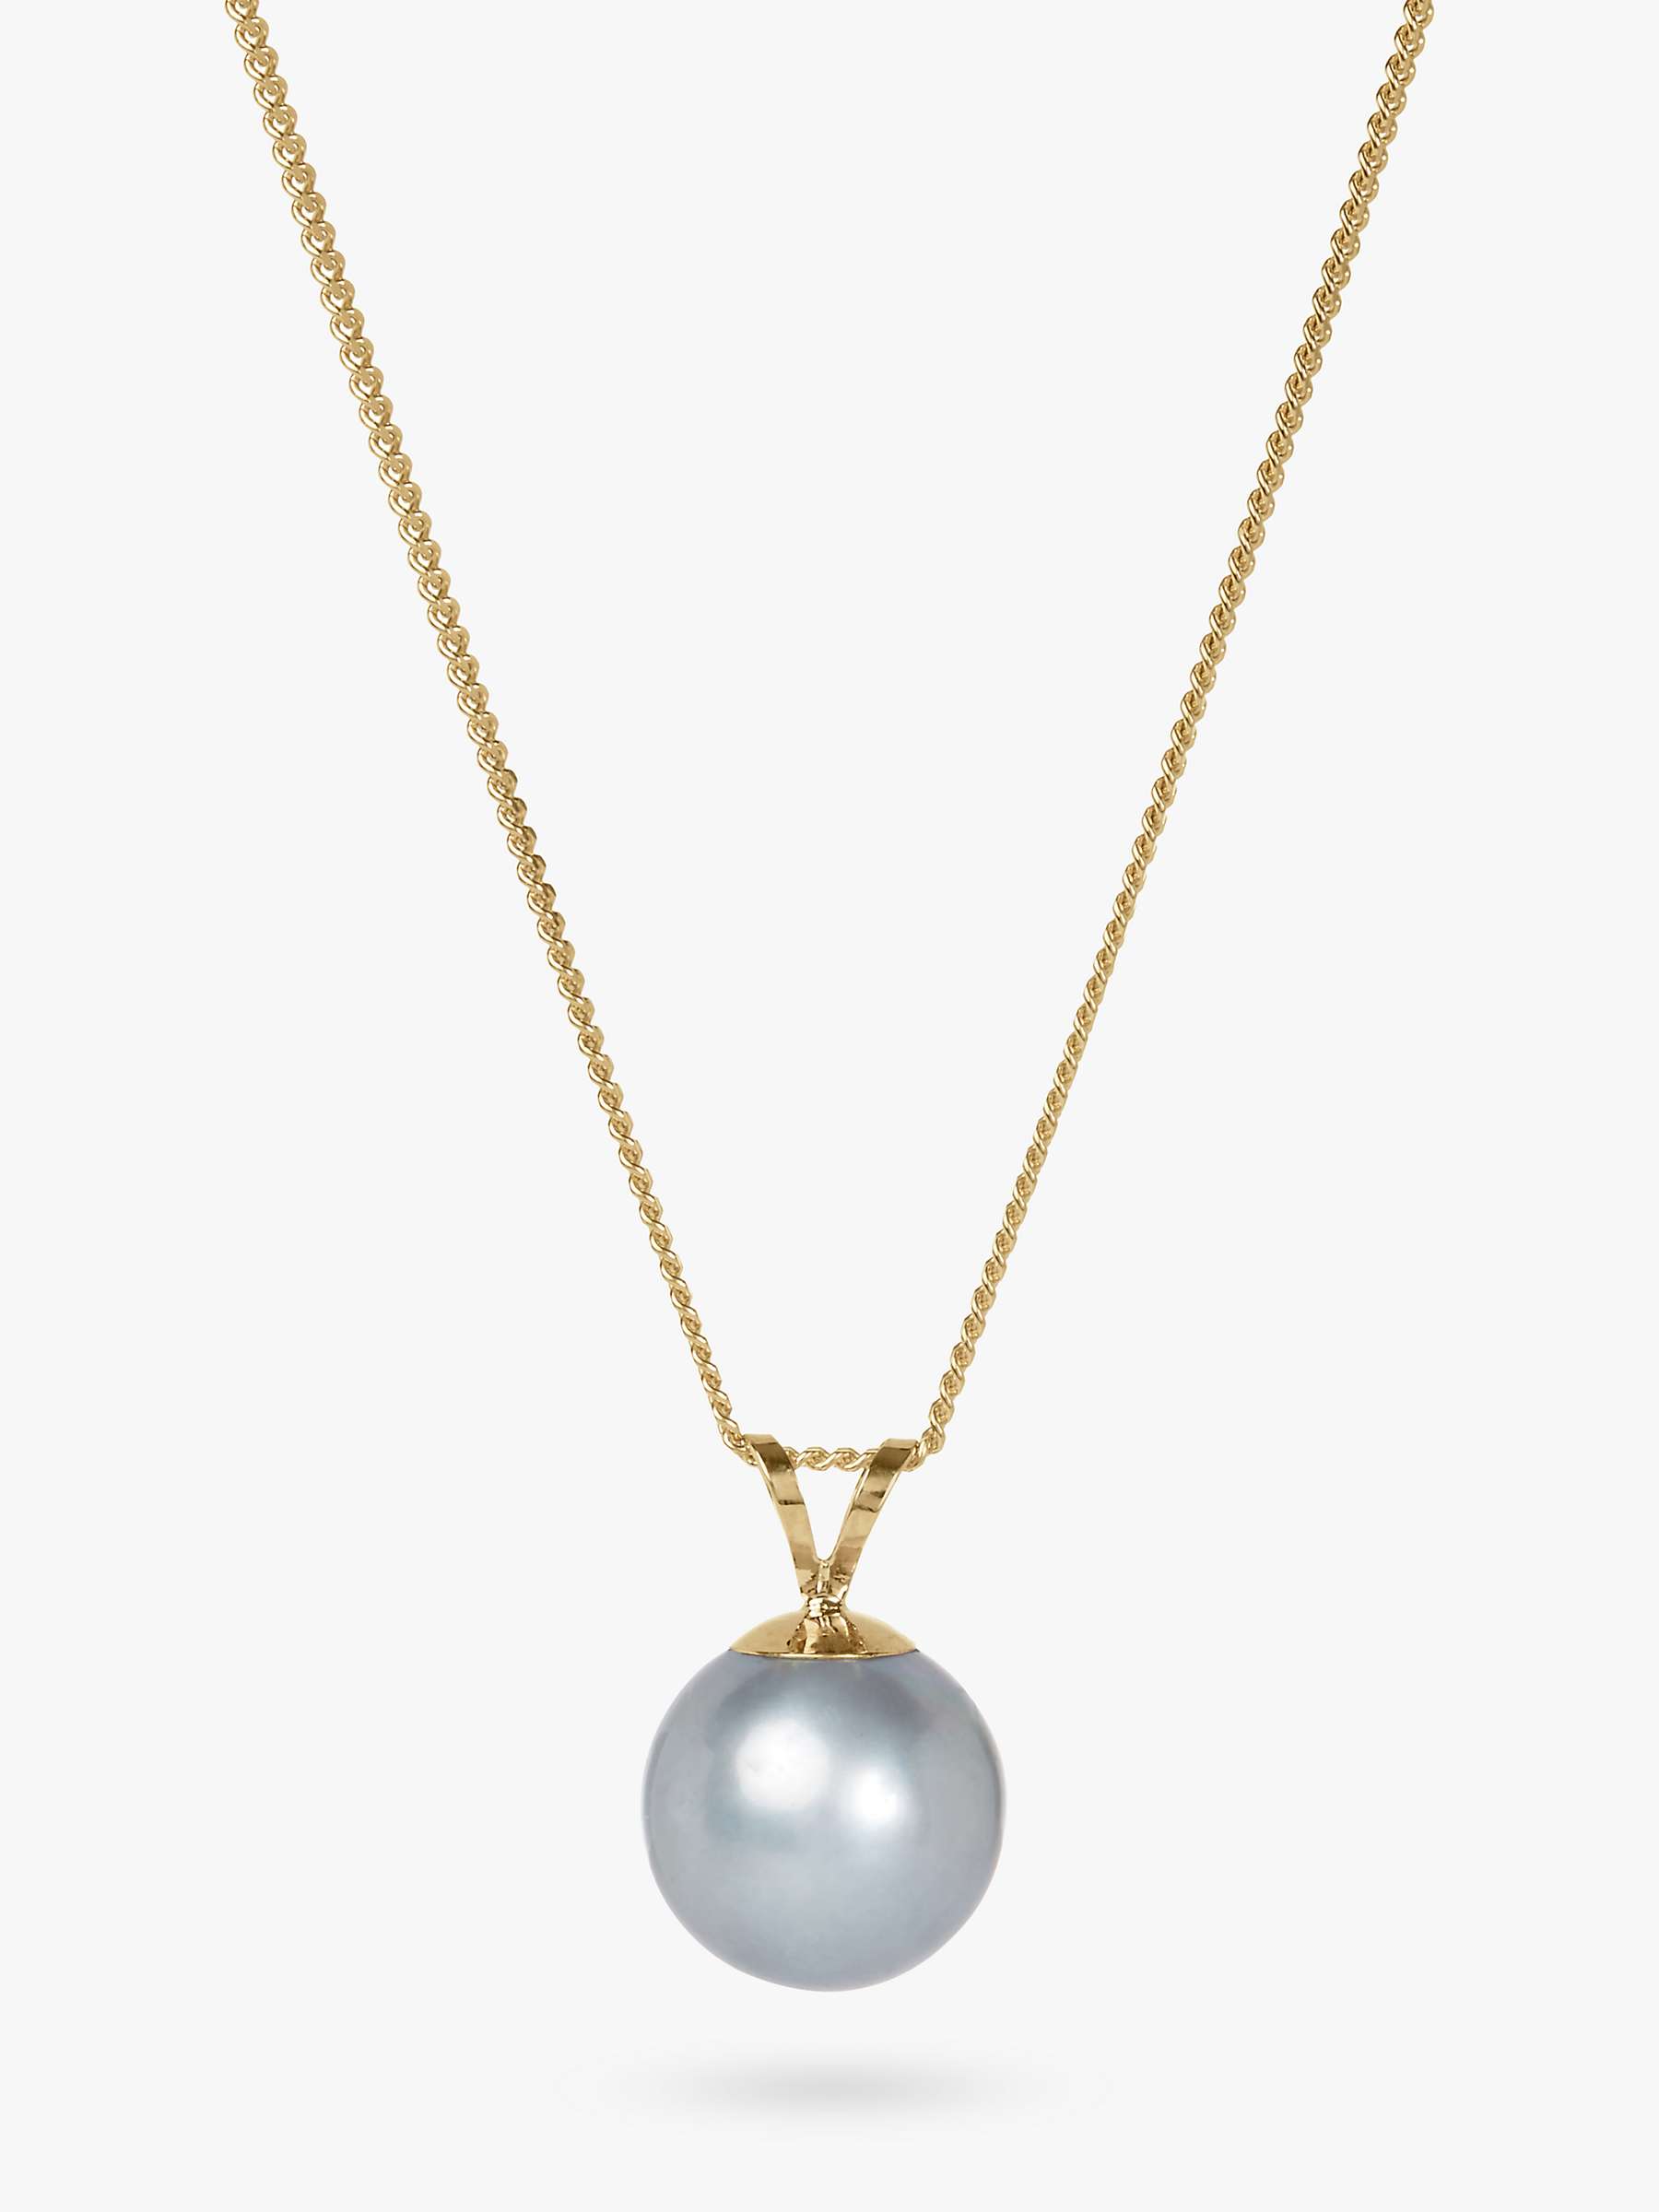 Buy A B Davis 9ct Gold Freshwater Pearl Pendant Necklace Online at johnlewis.com